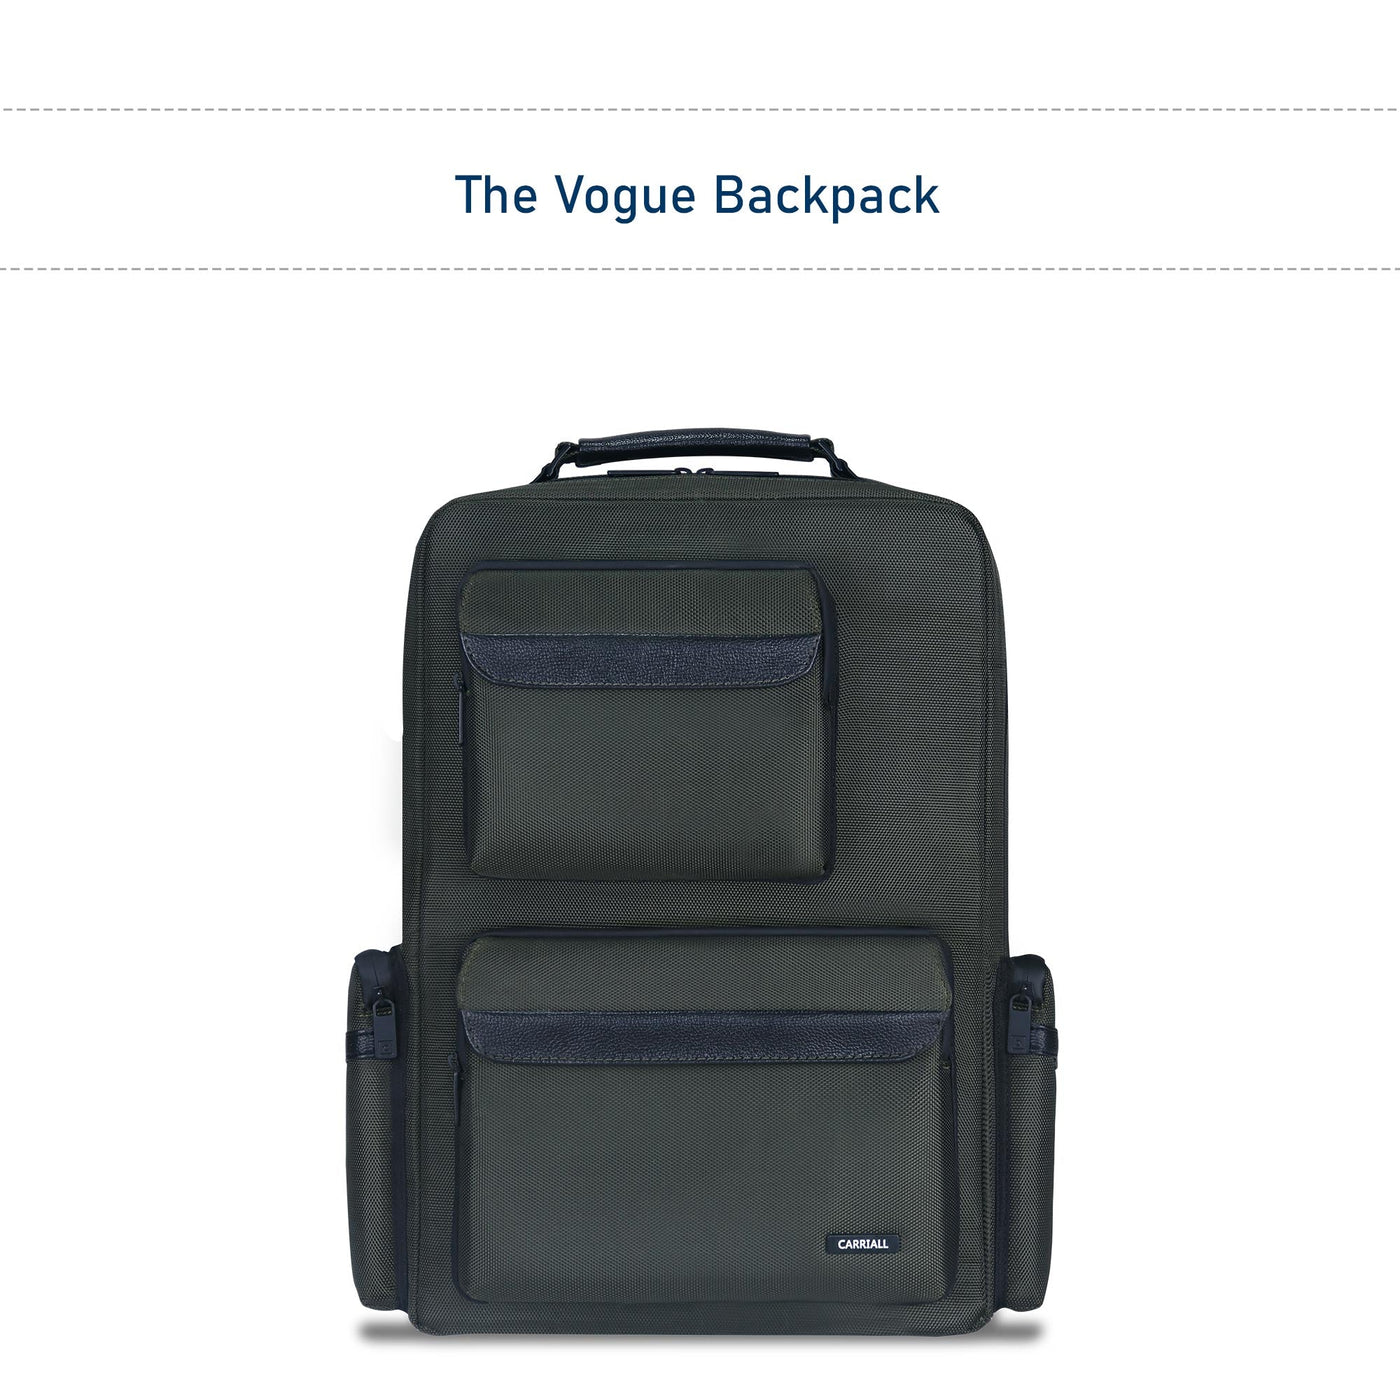 The Vogue Backpack